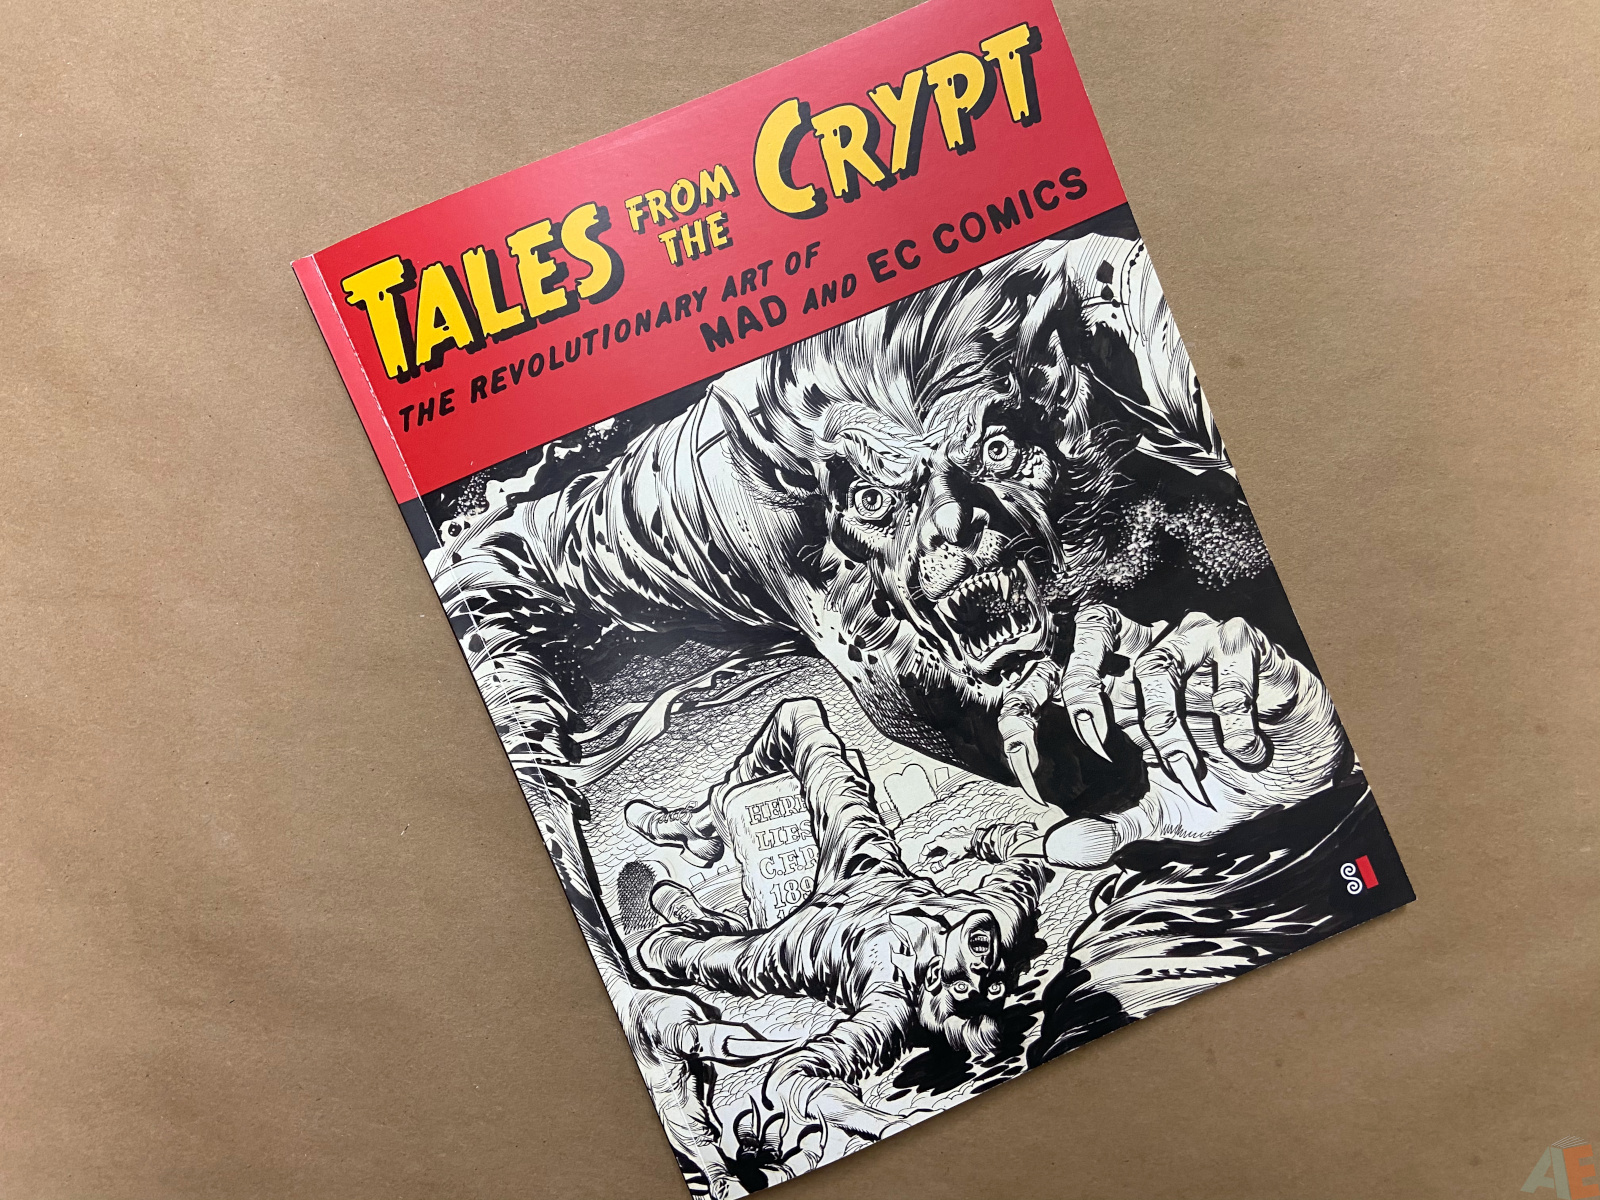 Tales From The Crypt Exhibition Catalog interior 12